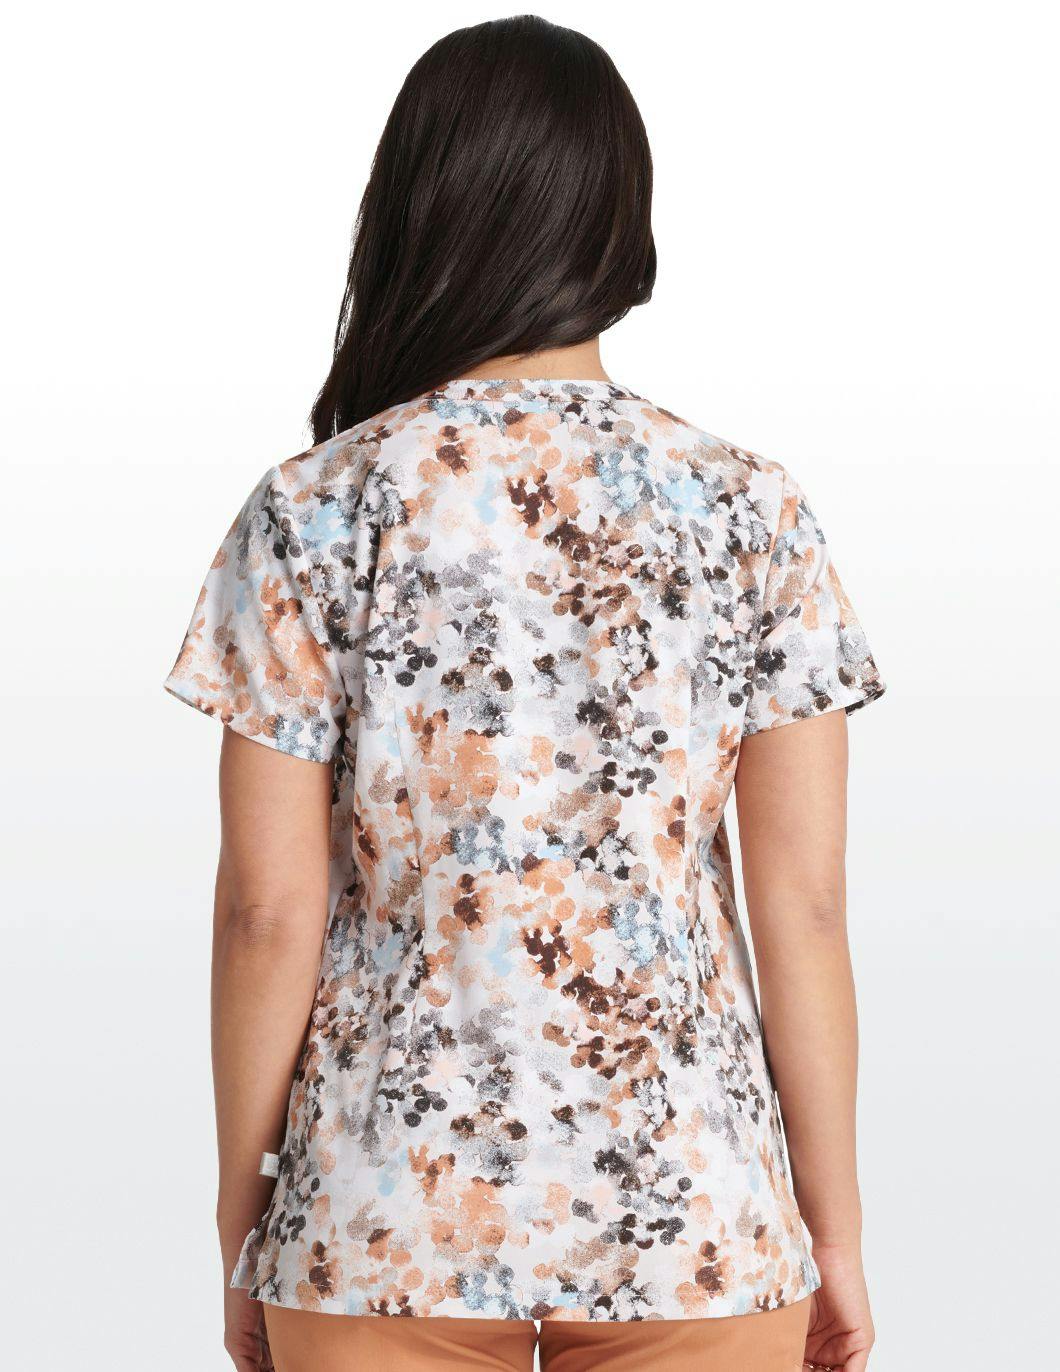 Healing-Hands-Limited-Edition-Print-Scrub-Top-Back